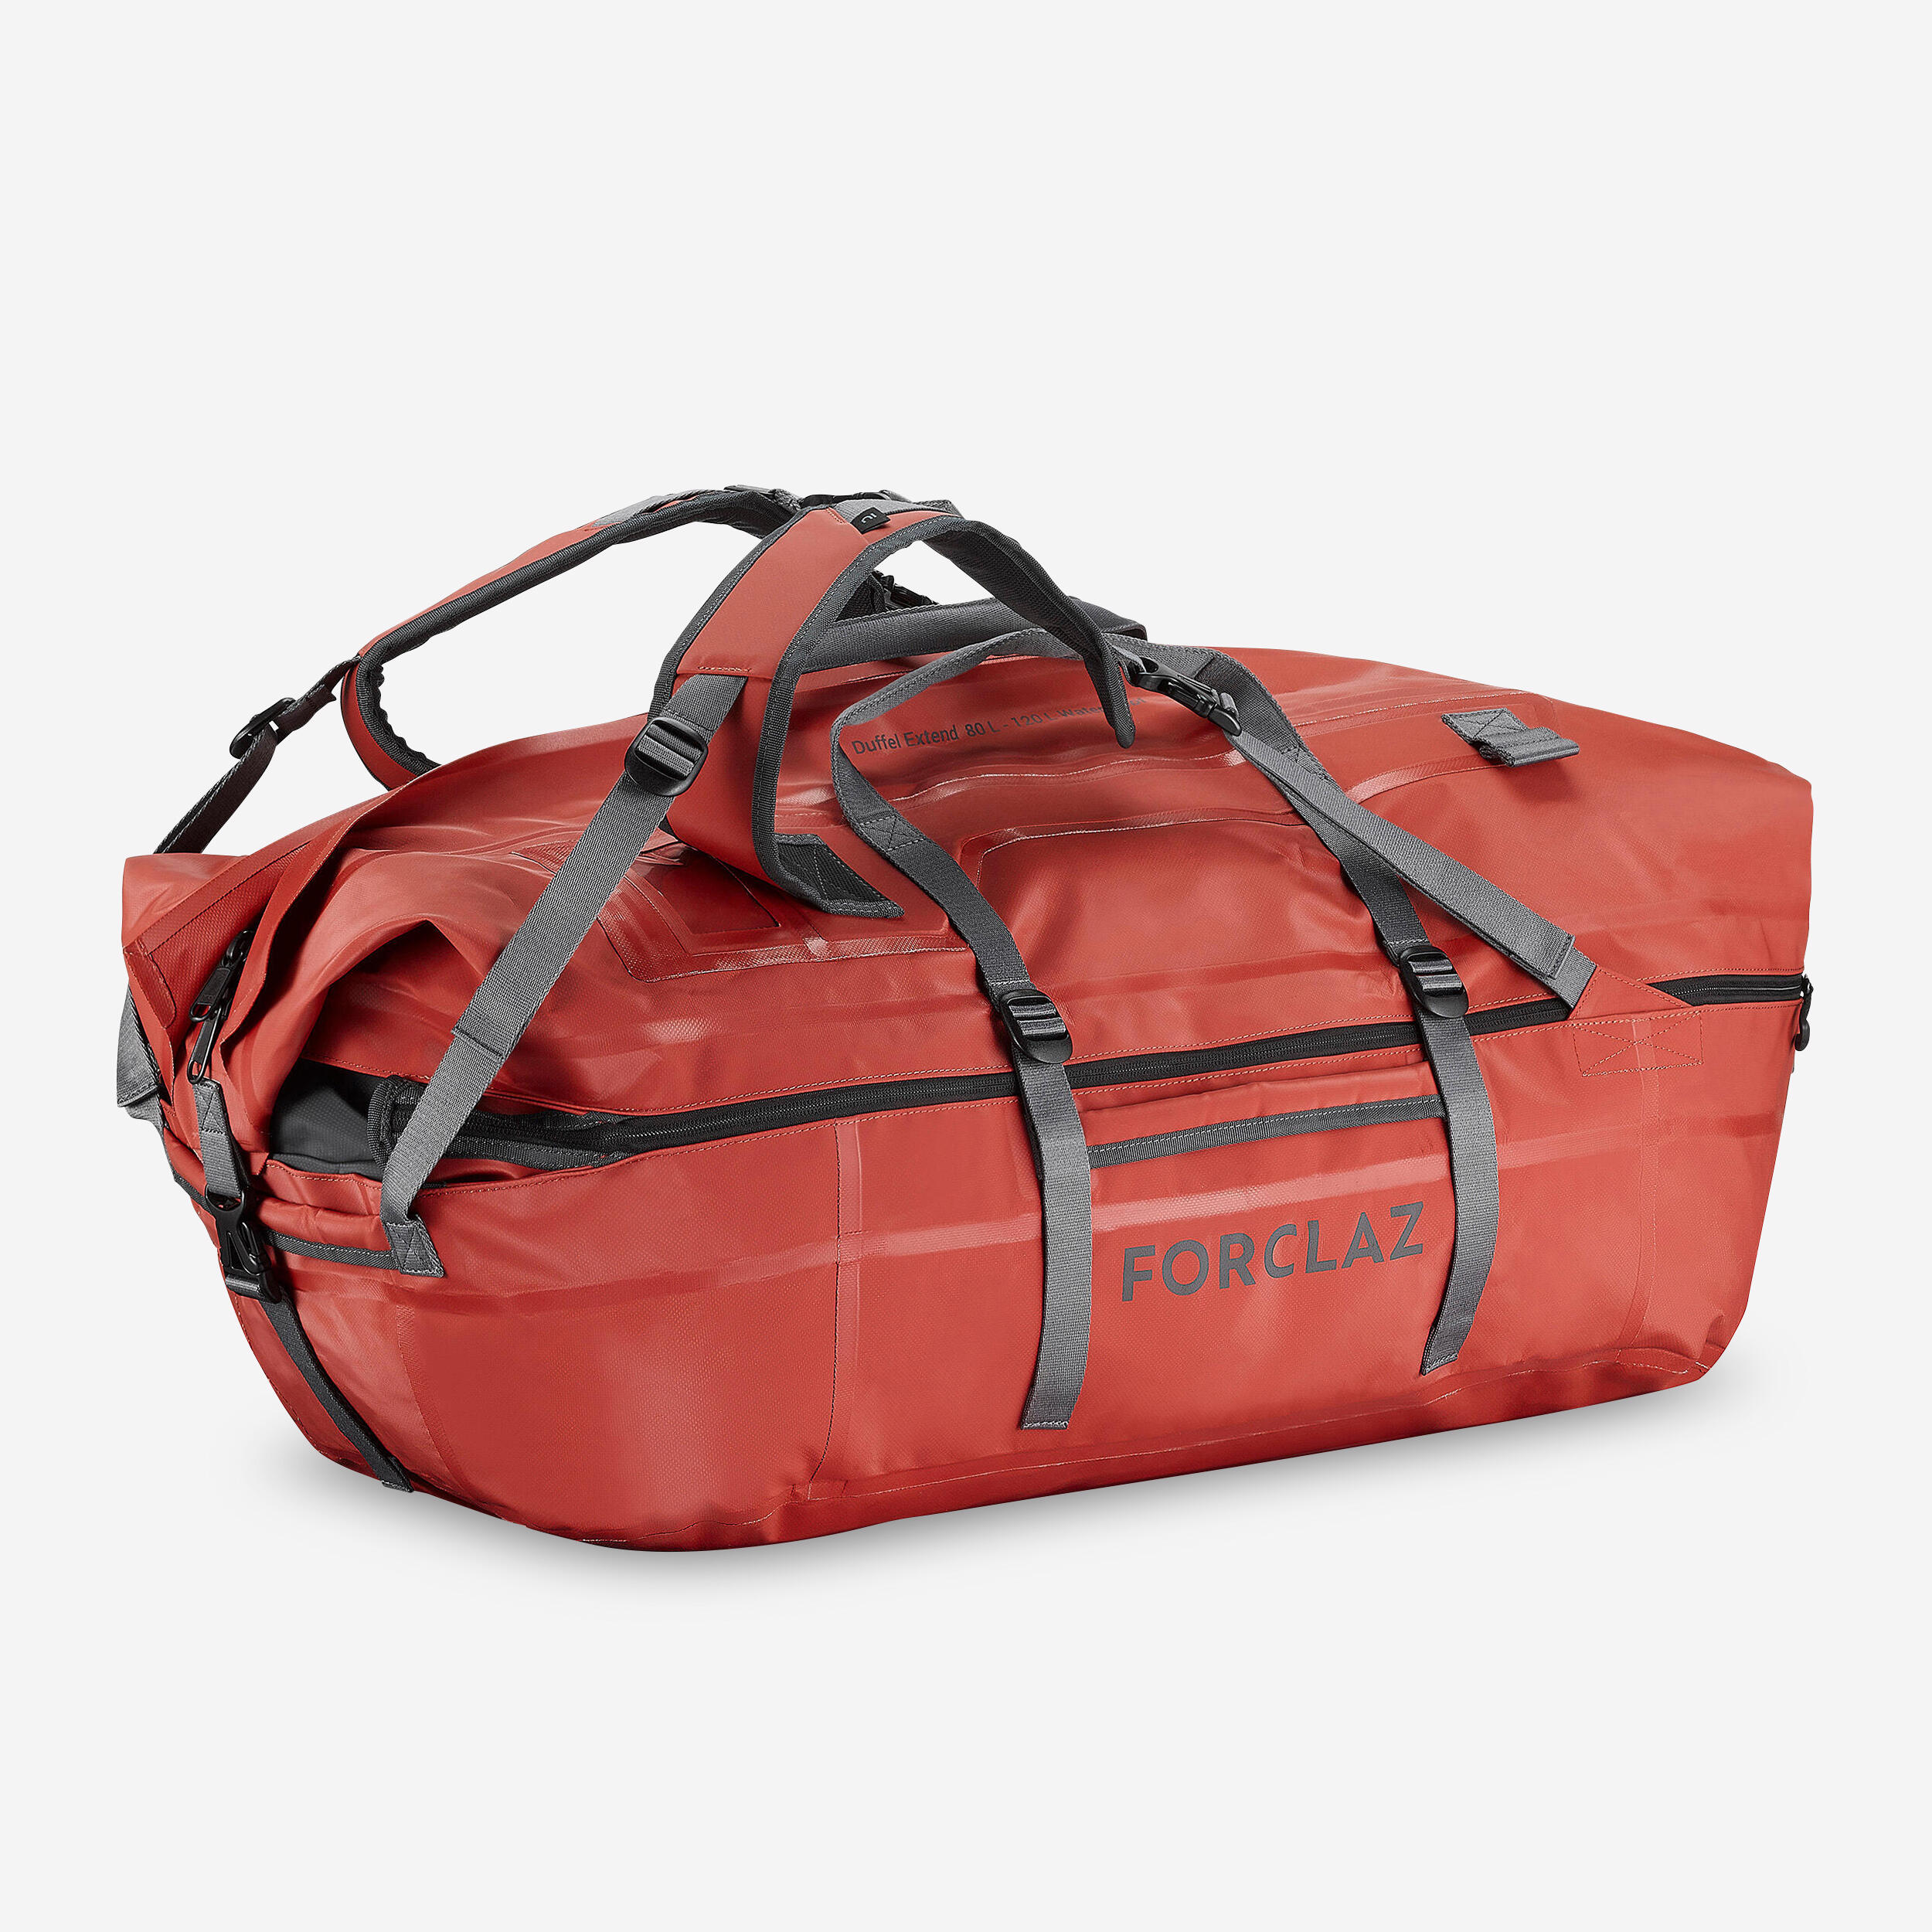 Reasons to Buy a Duffle Bag | Tips and Advice | Lifeventure